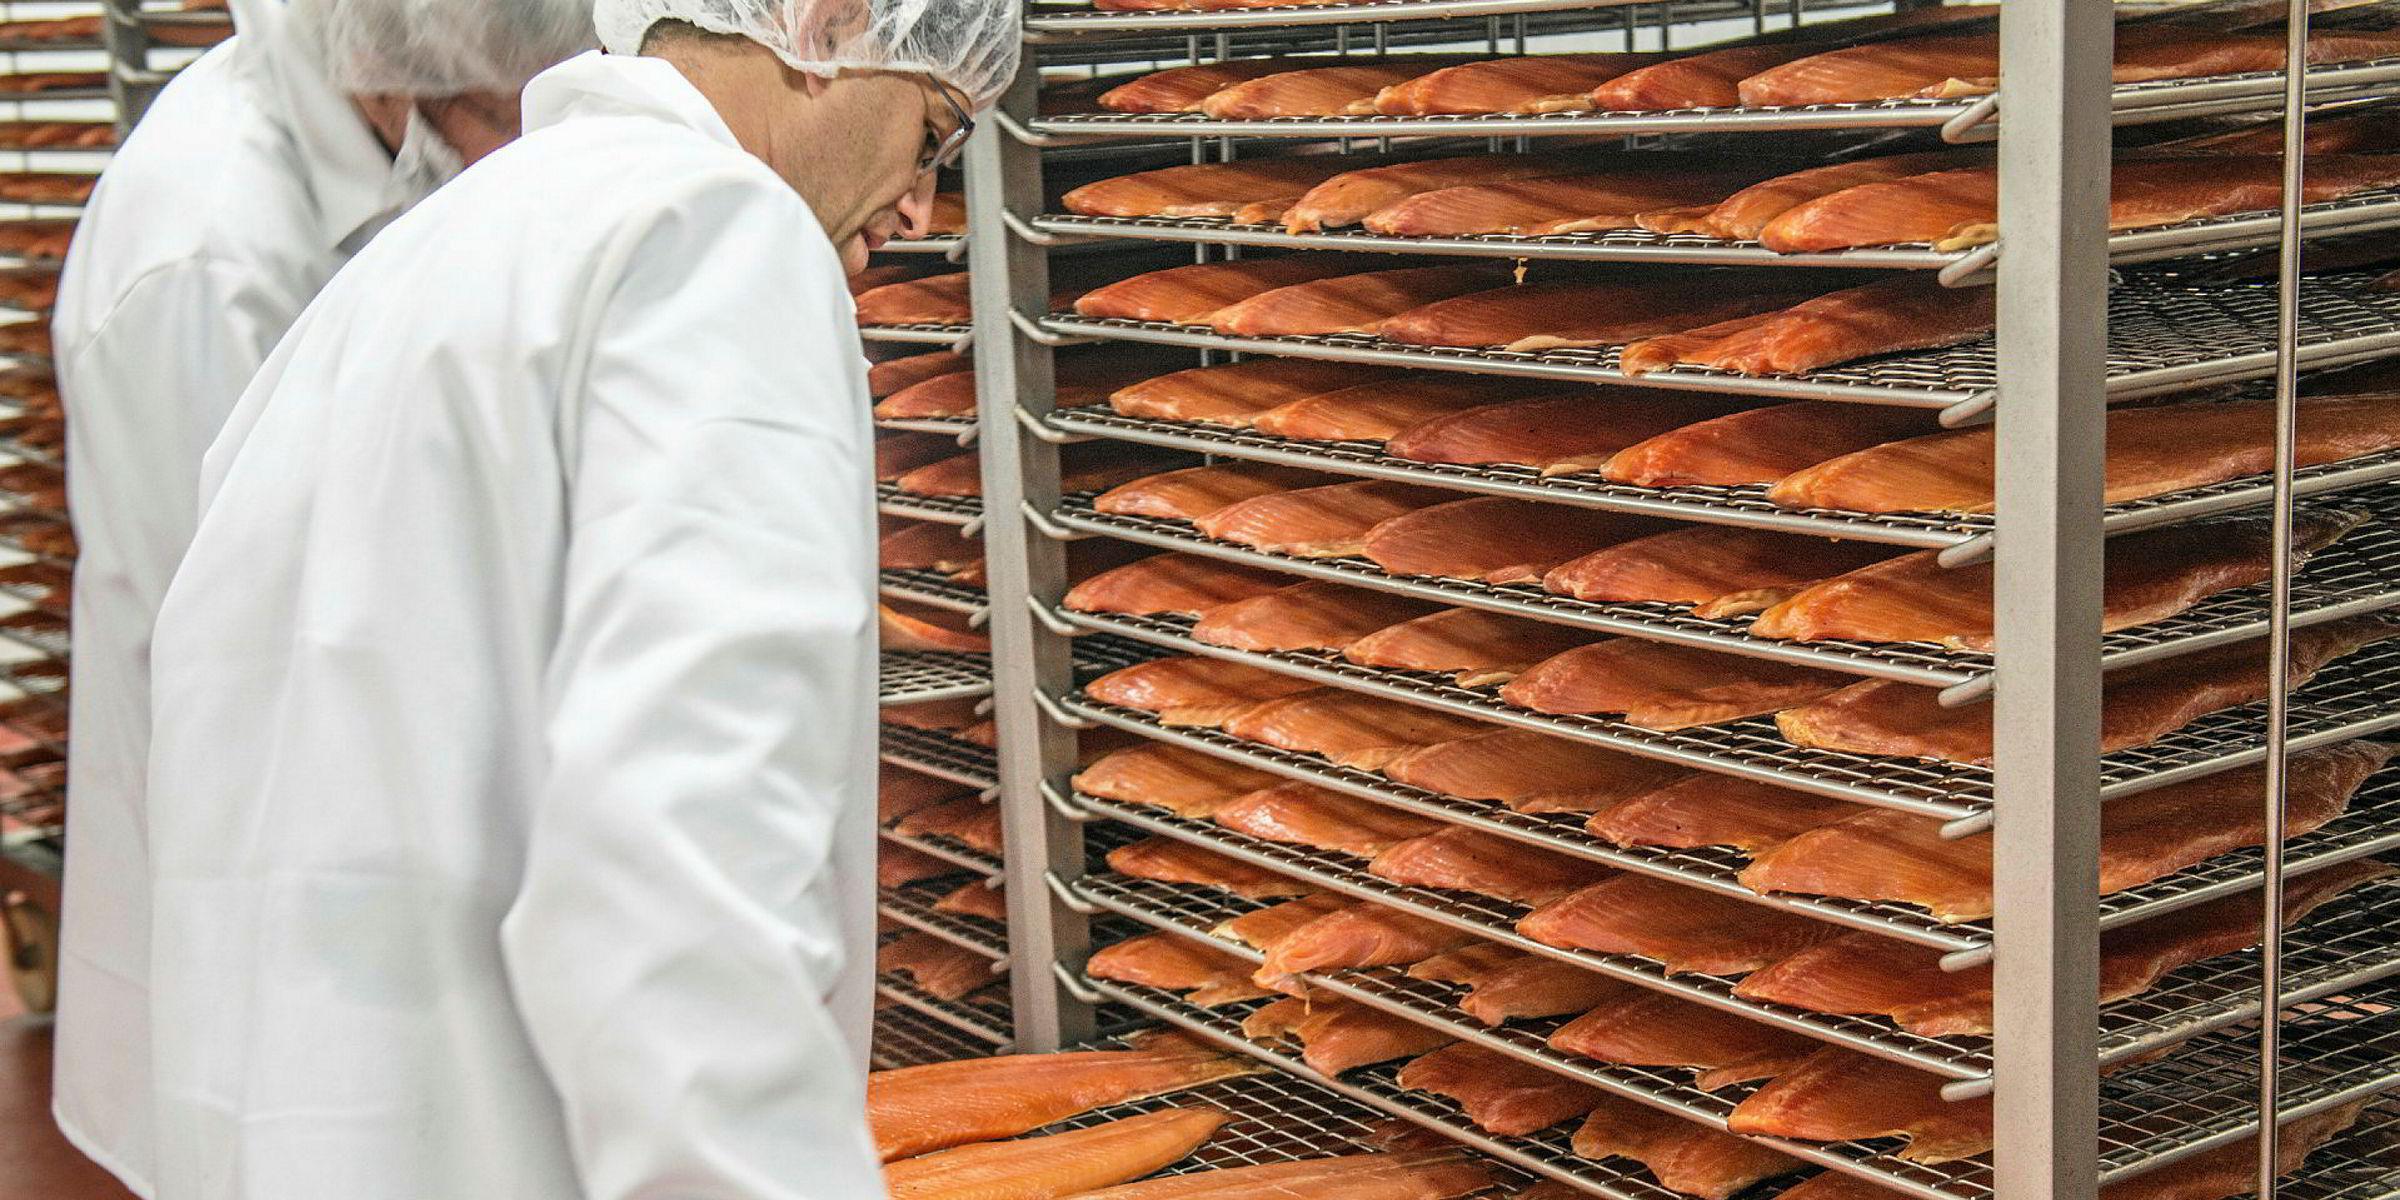 Acme Smoked Fish Corp. earns 4Star BAP Certification